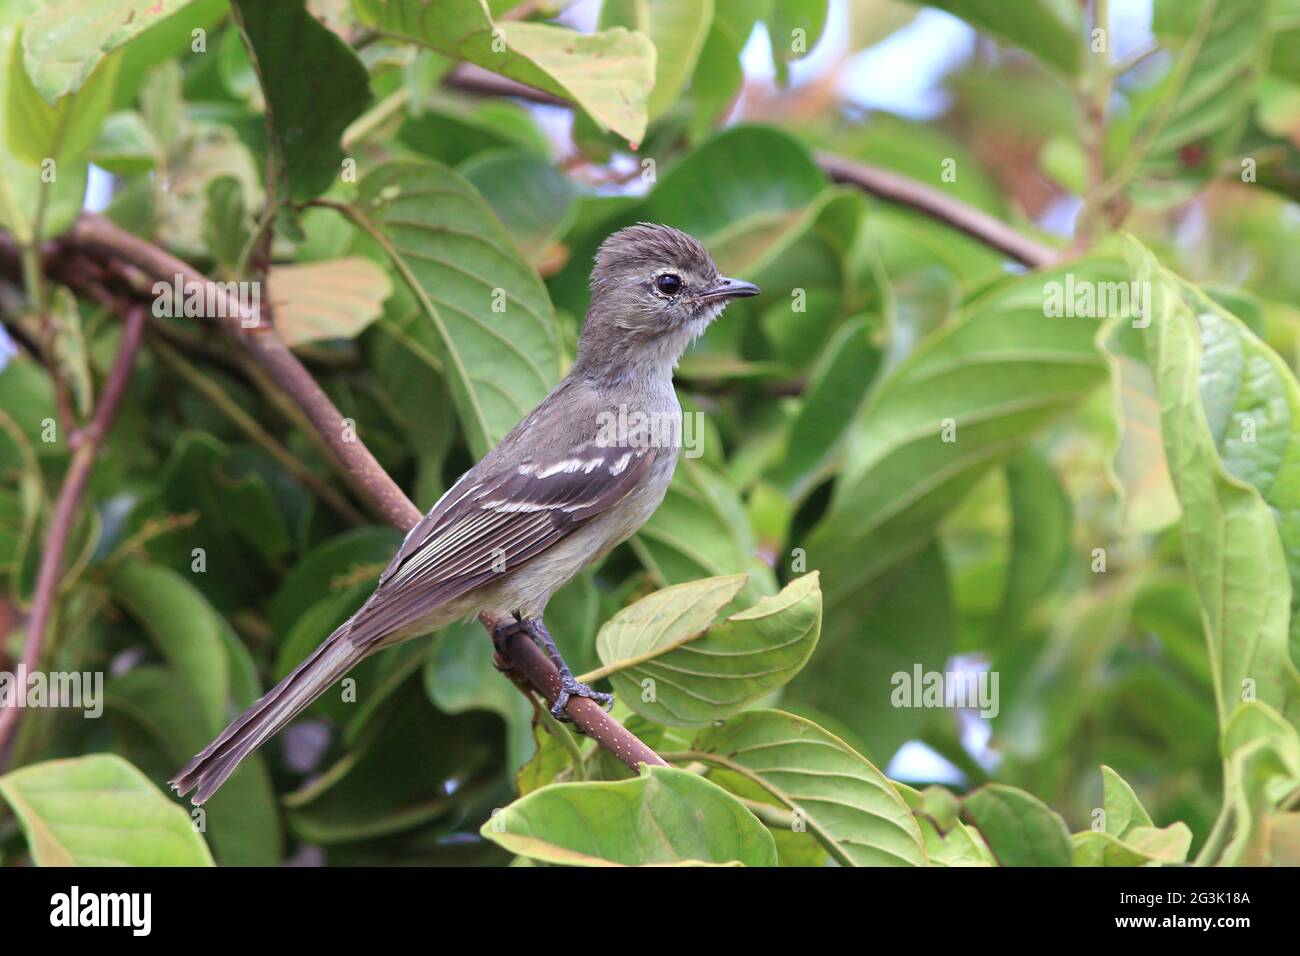 Highland Elaenia (Elaenia obscura) perched on a branch in the foliage. Stock Photo